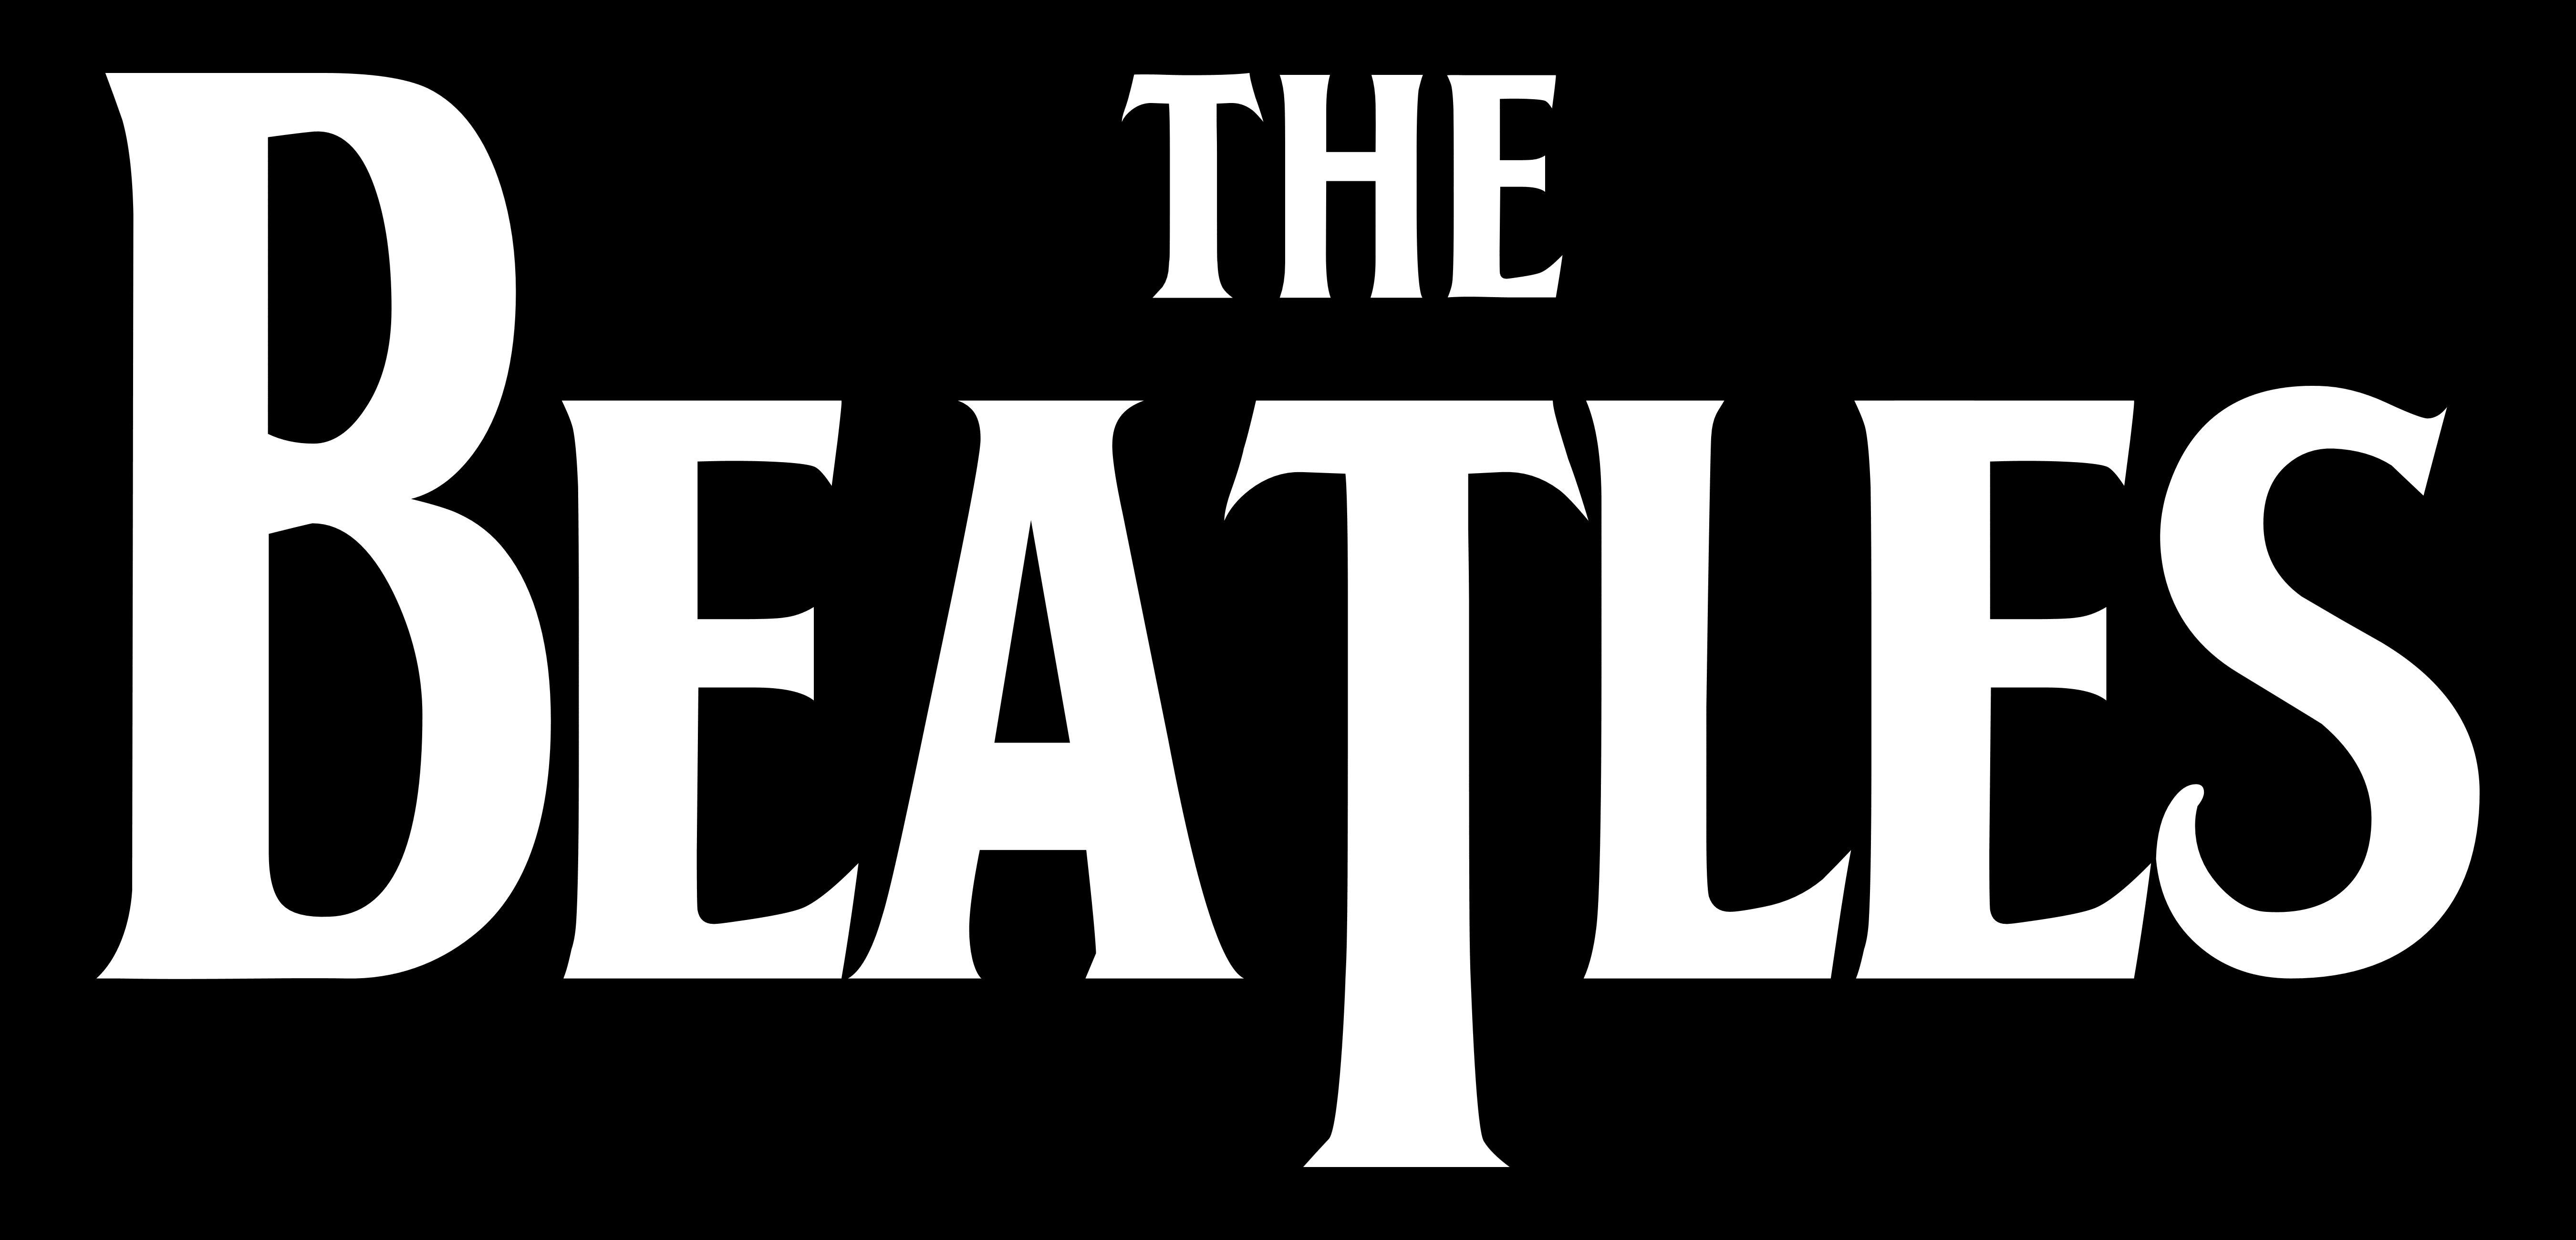 The Beatles Logo - Beatles Logo, Beatles Symbol, Meaning, History and Evolution